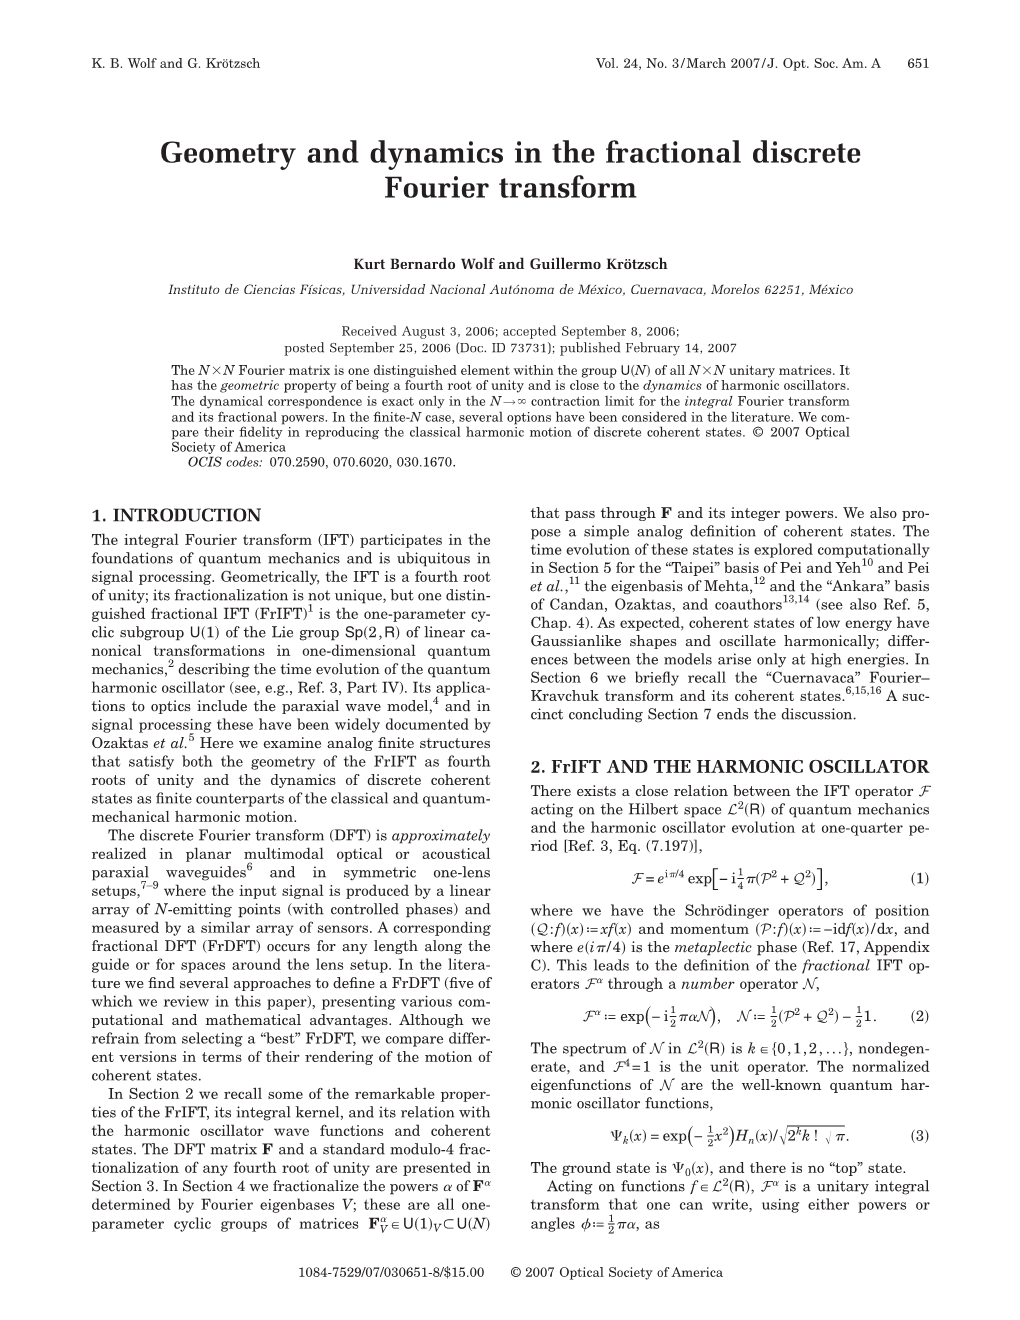 Geometry and Dynamics in the Fractional Discrete Fourier Transform